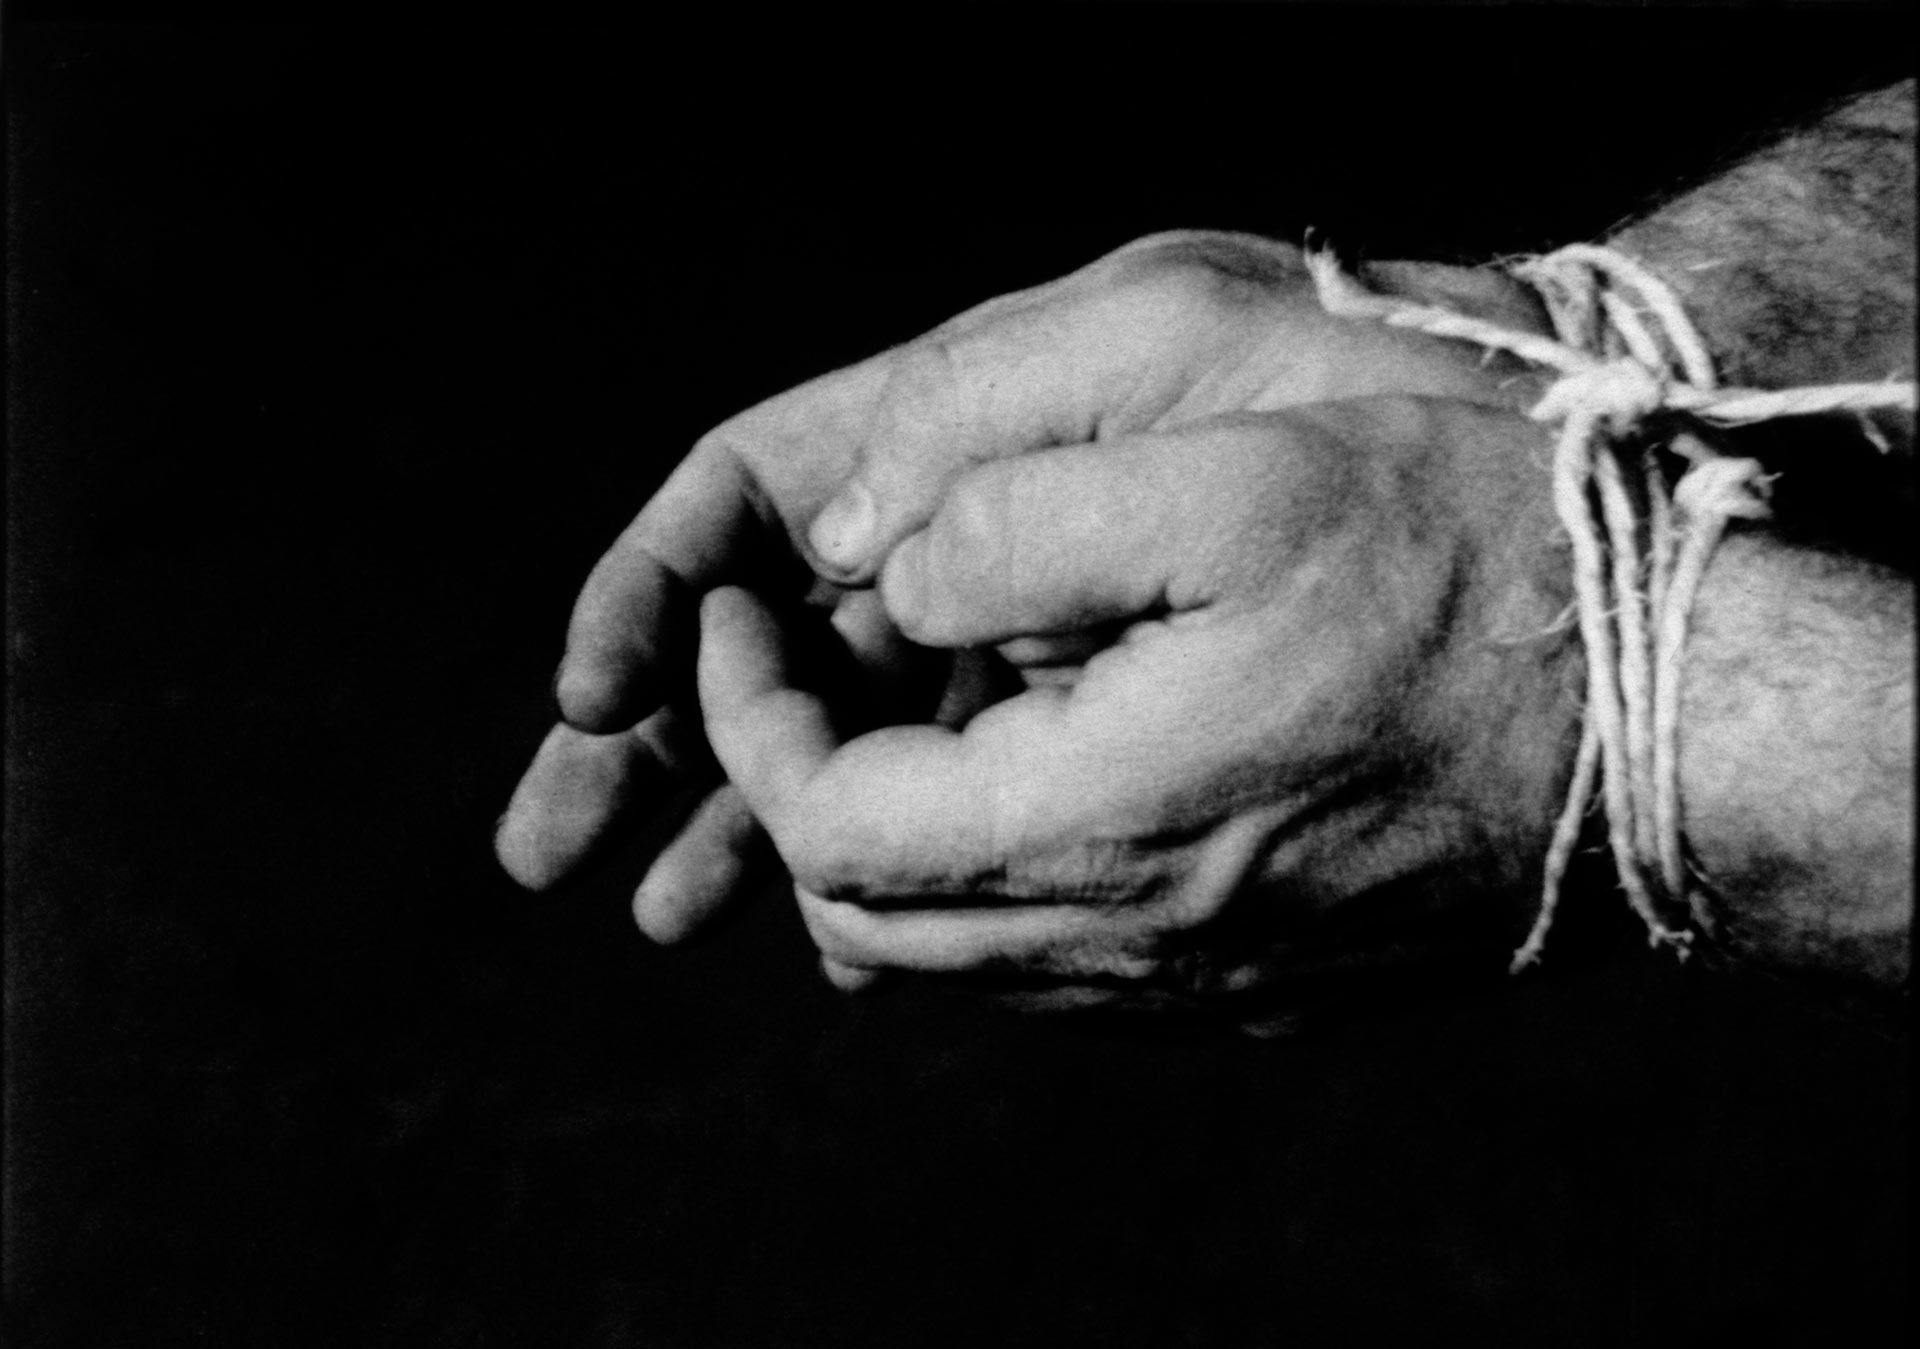 A black and white video by Richard Serra titled Hands Tied, dated 1968.